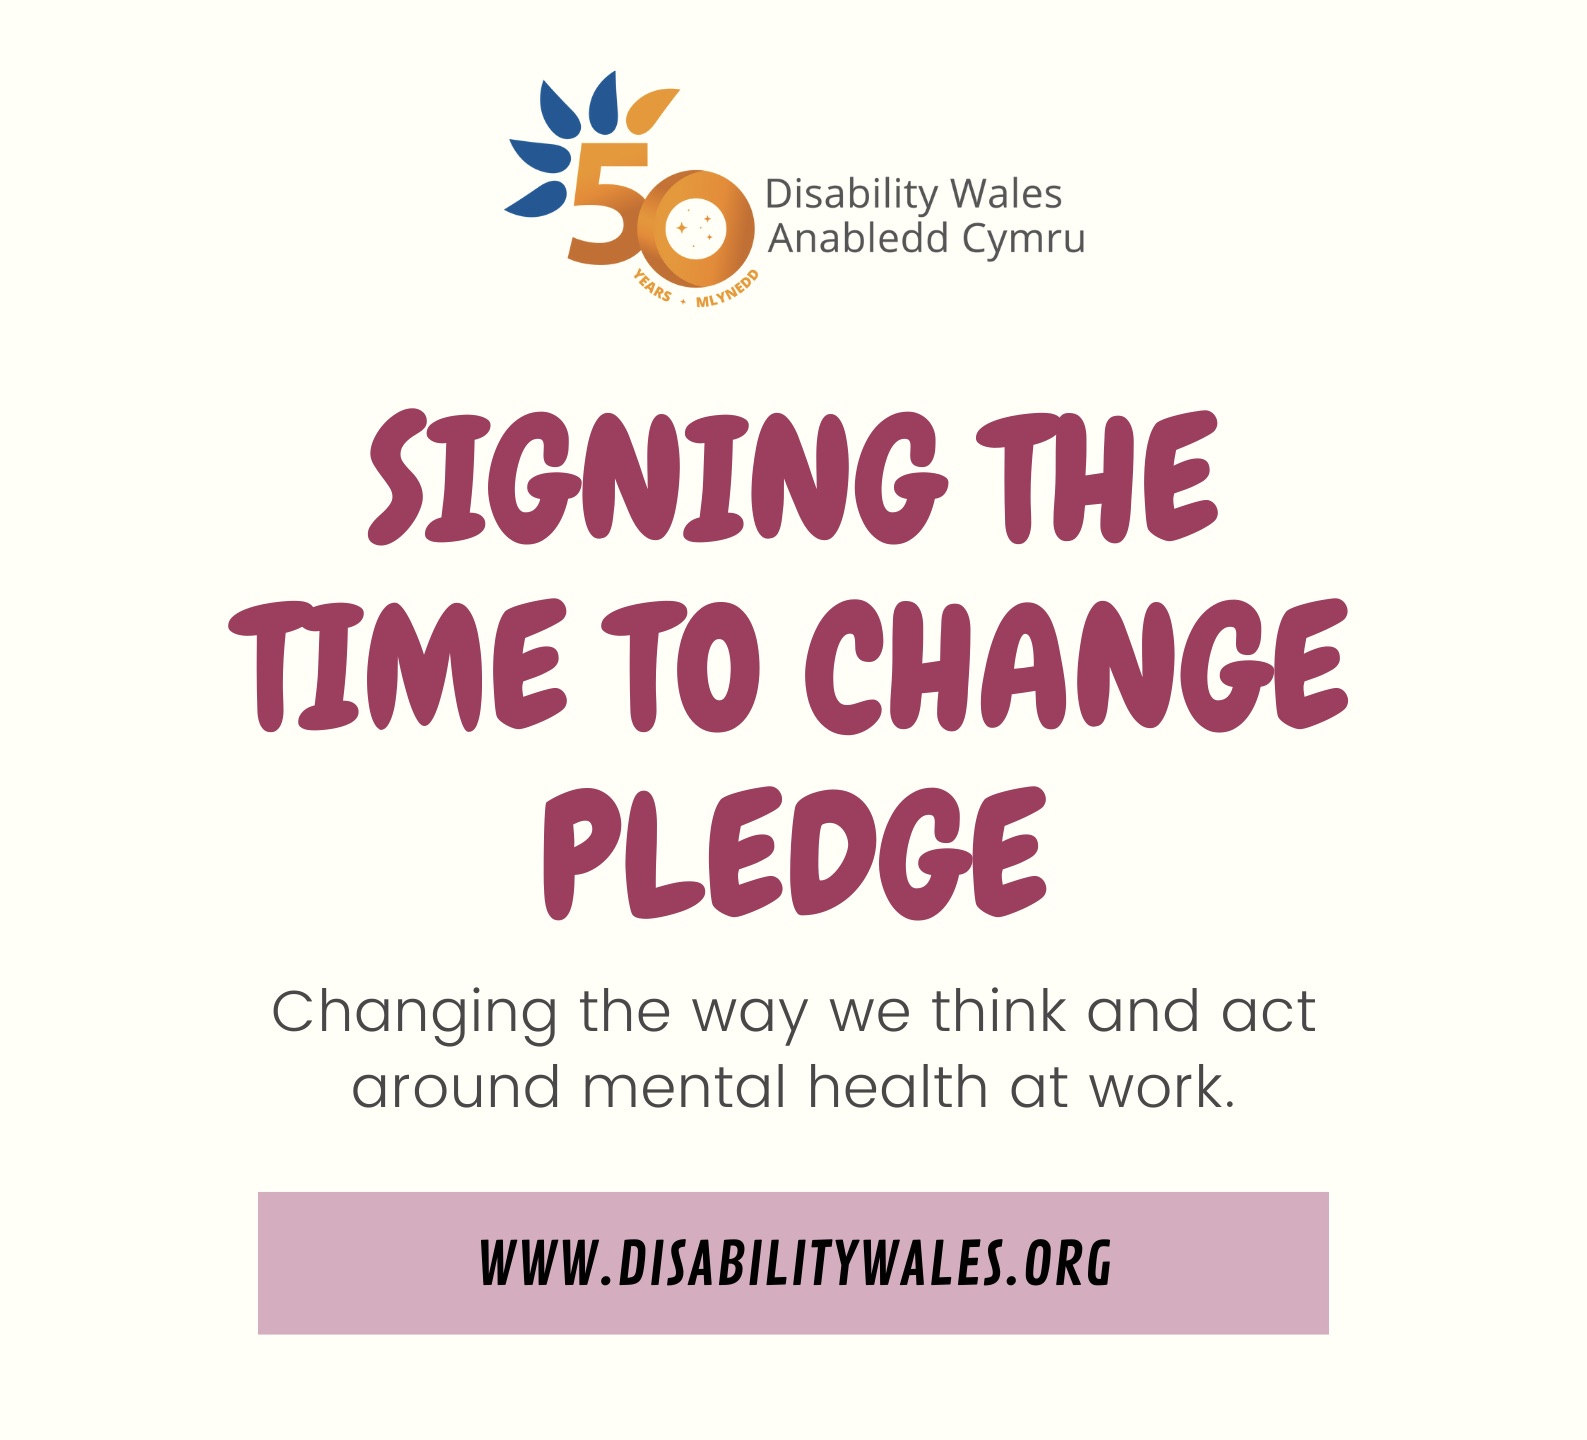 DW's 50th anniversary logo above red text on a cream background that reads Signing the Time to Change pledge. Black text underneath it reads, Changing the way we think and act around mental health at work.